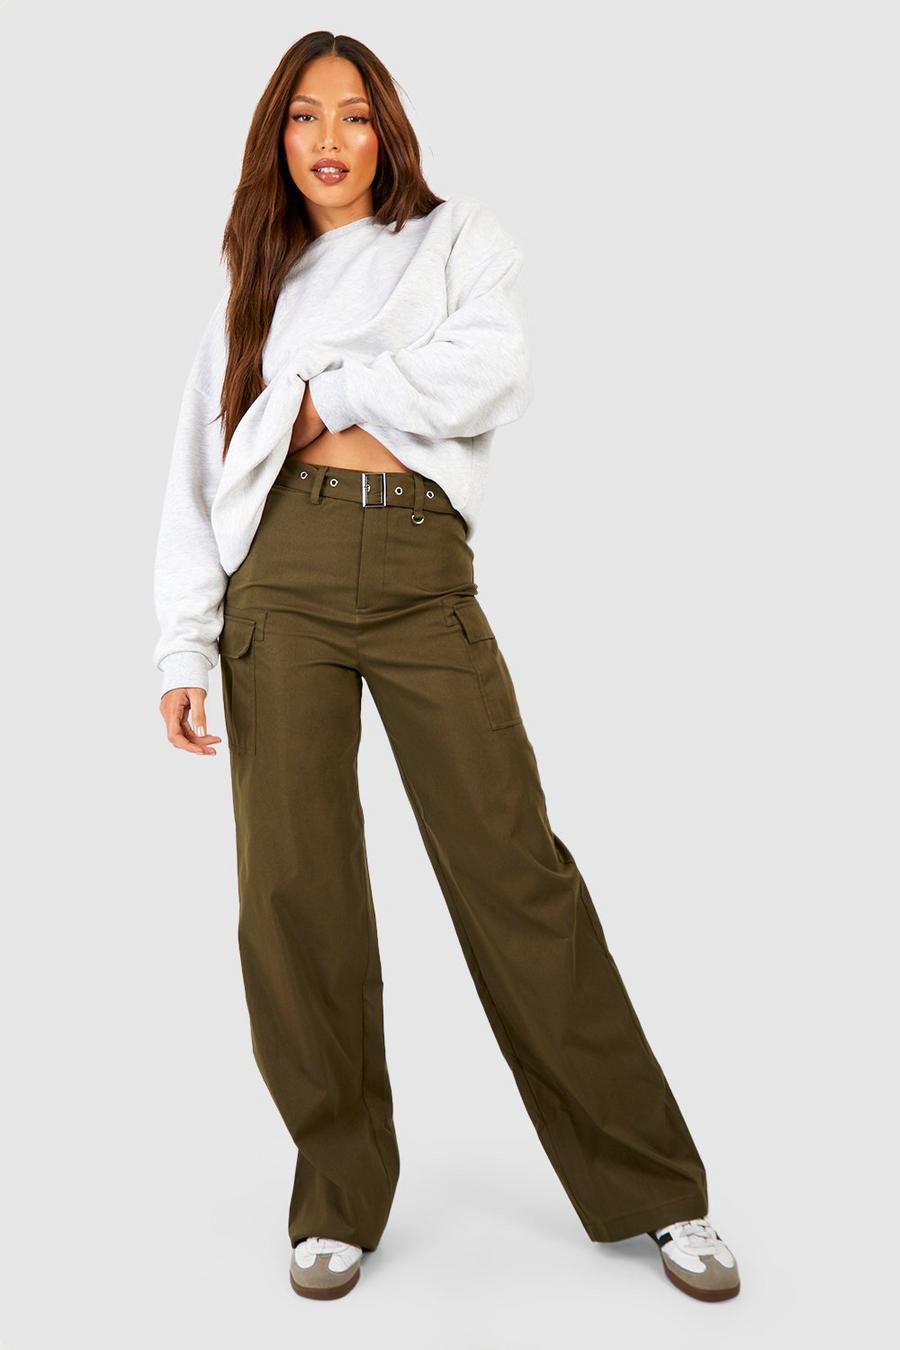 NEW LADIES WIDE LEG CARGO COMBAT STRETCH CASUAL TROUSERS WOMENS